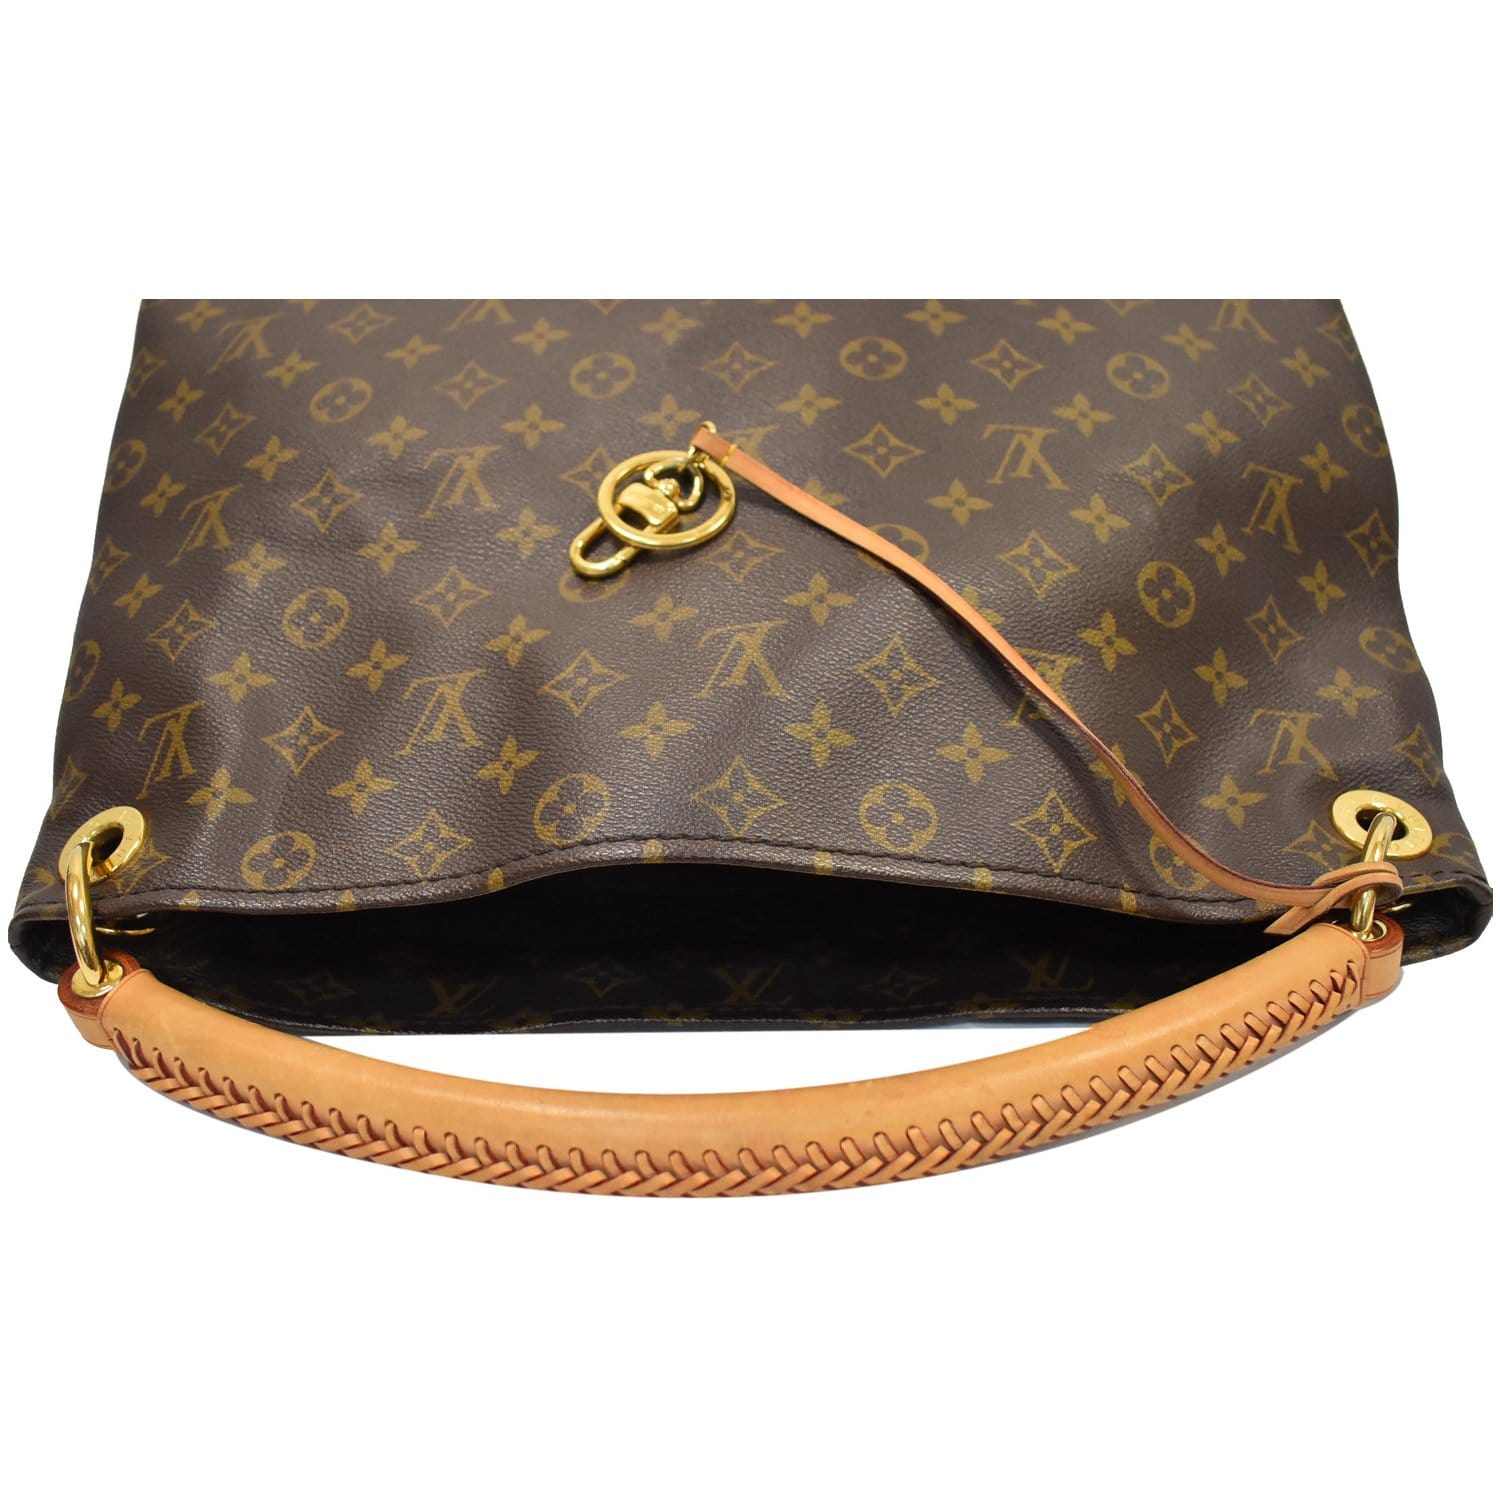 Pre-Owned Louis Vuitton Artsy MM Brown 